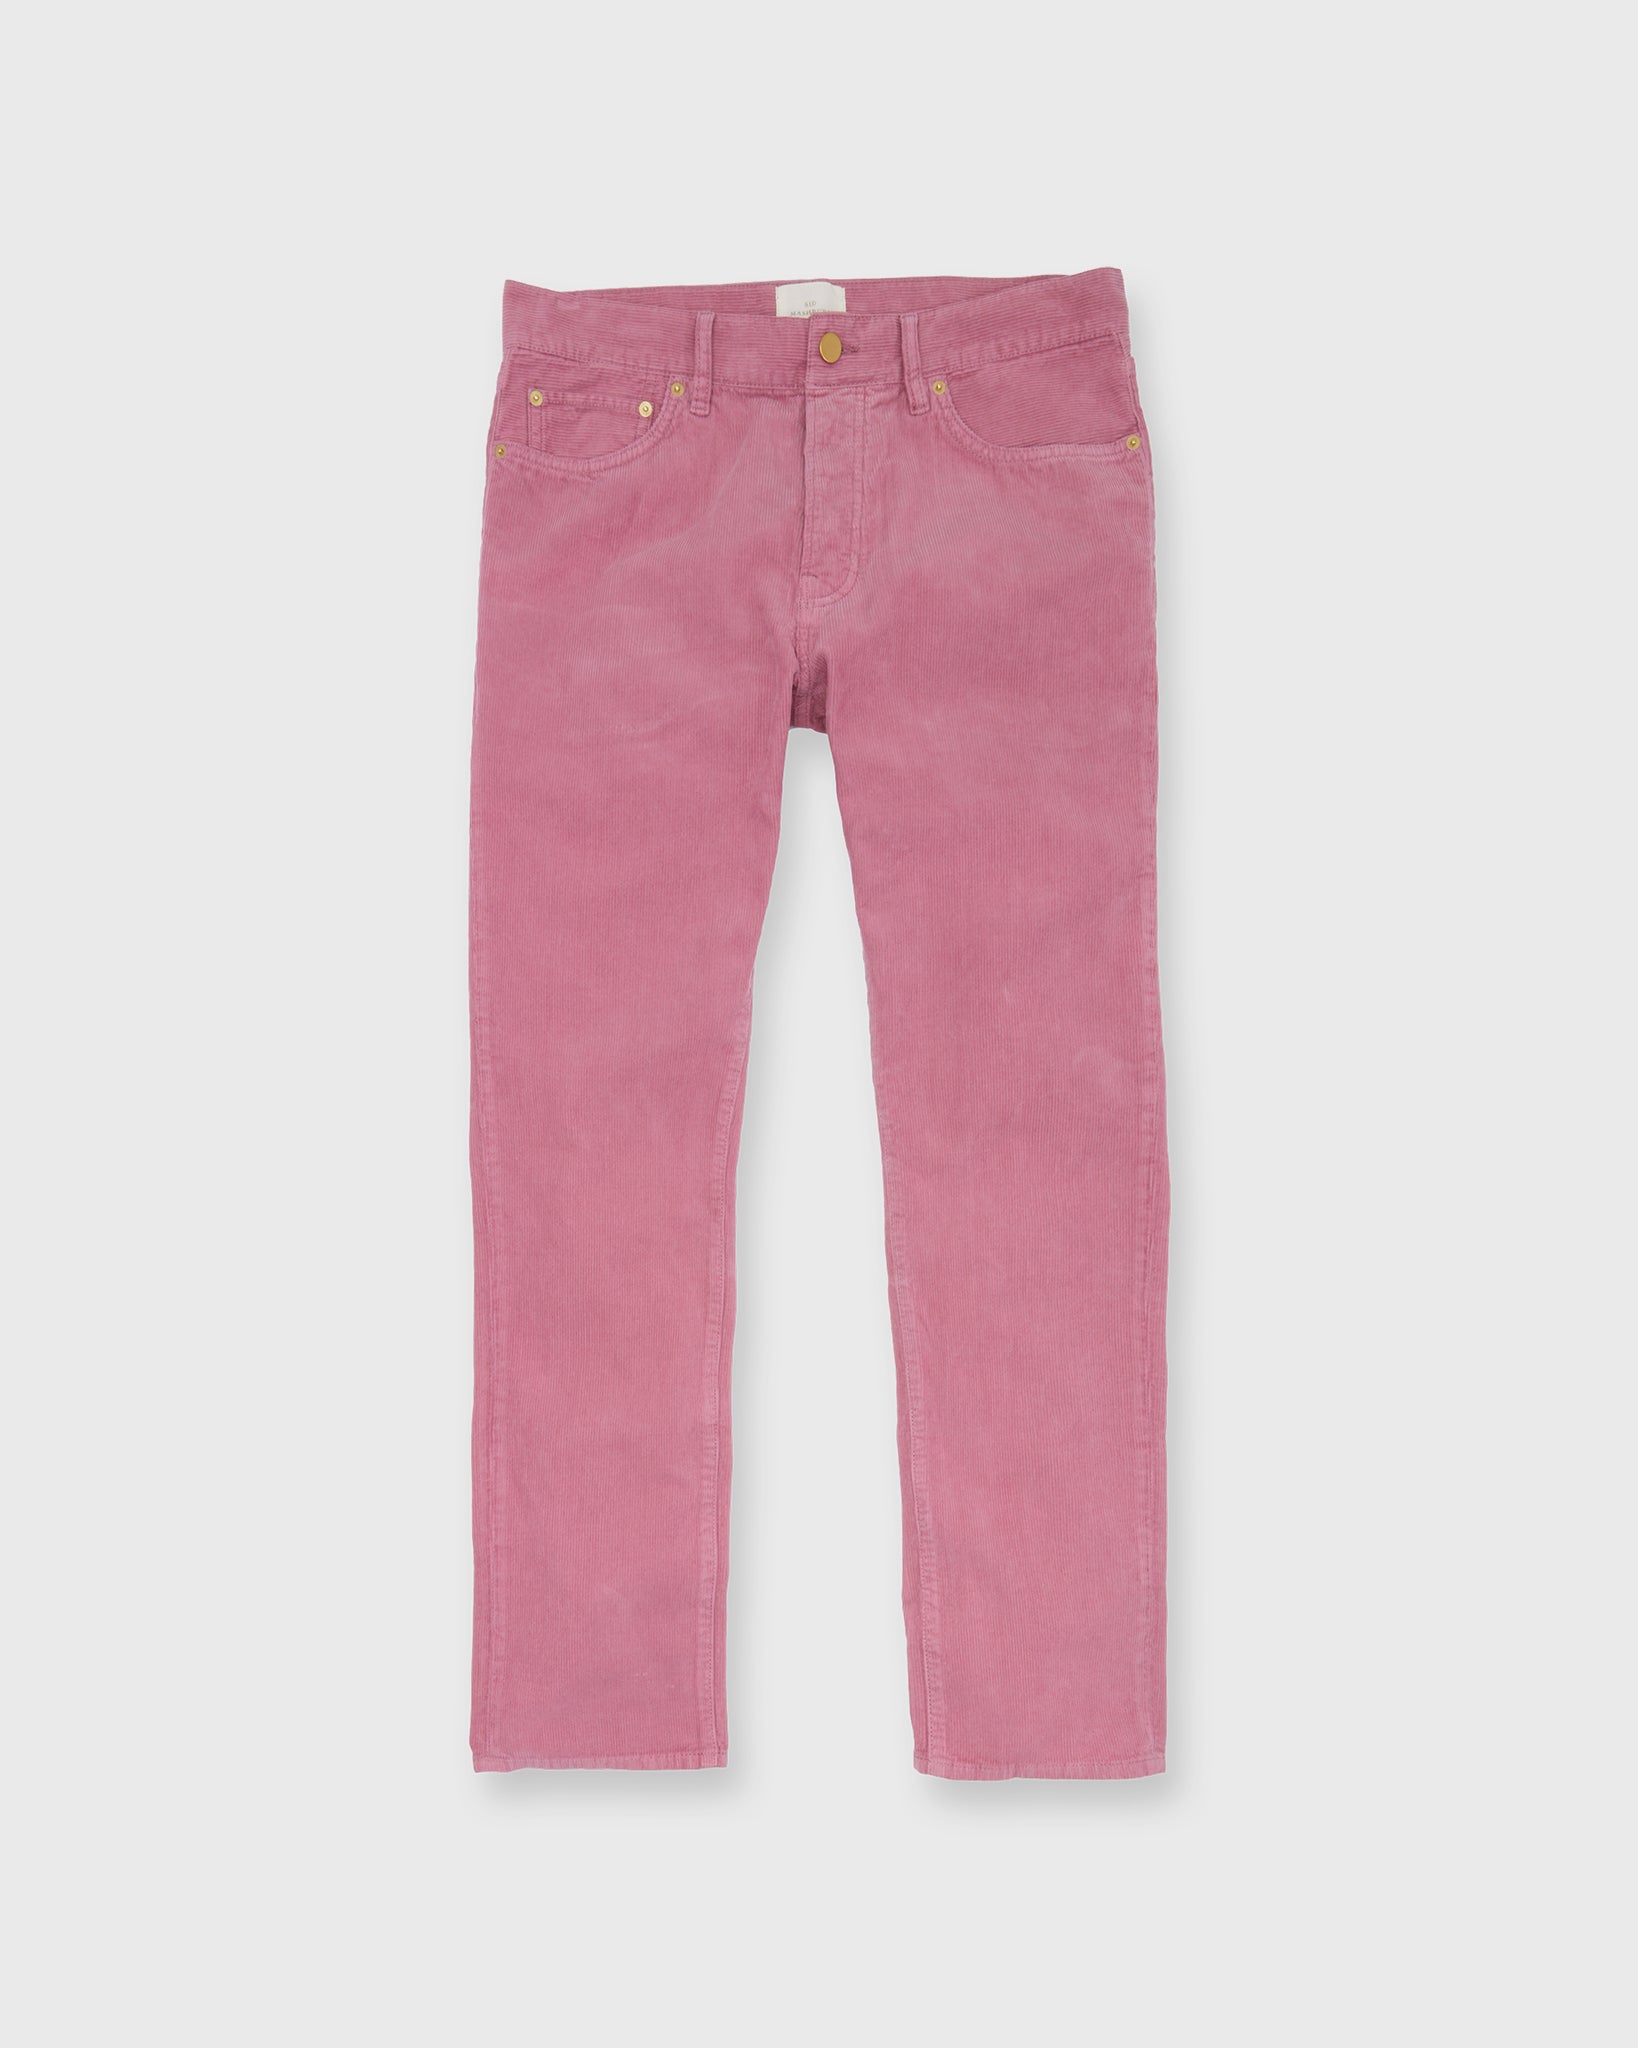 Slim Straight 5-Pocket Pant in Orchid Corduroy